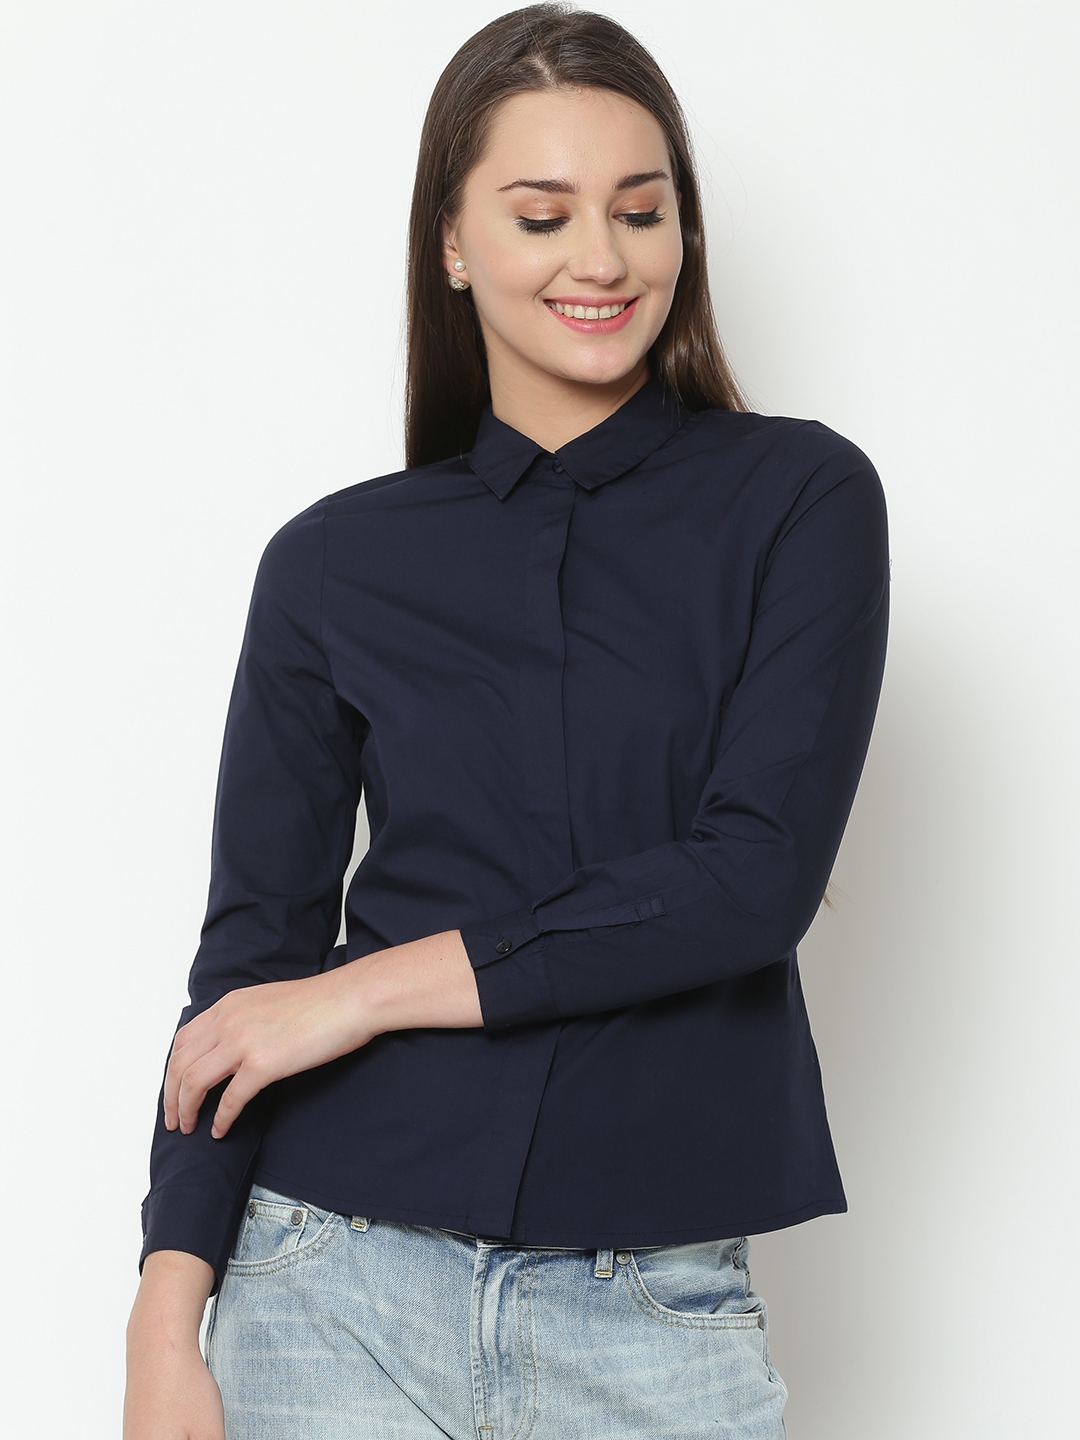 Buy United Colors Of Benetton Women Navy Blue Solid Casual Shirt ...